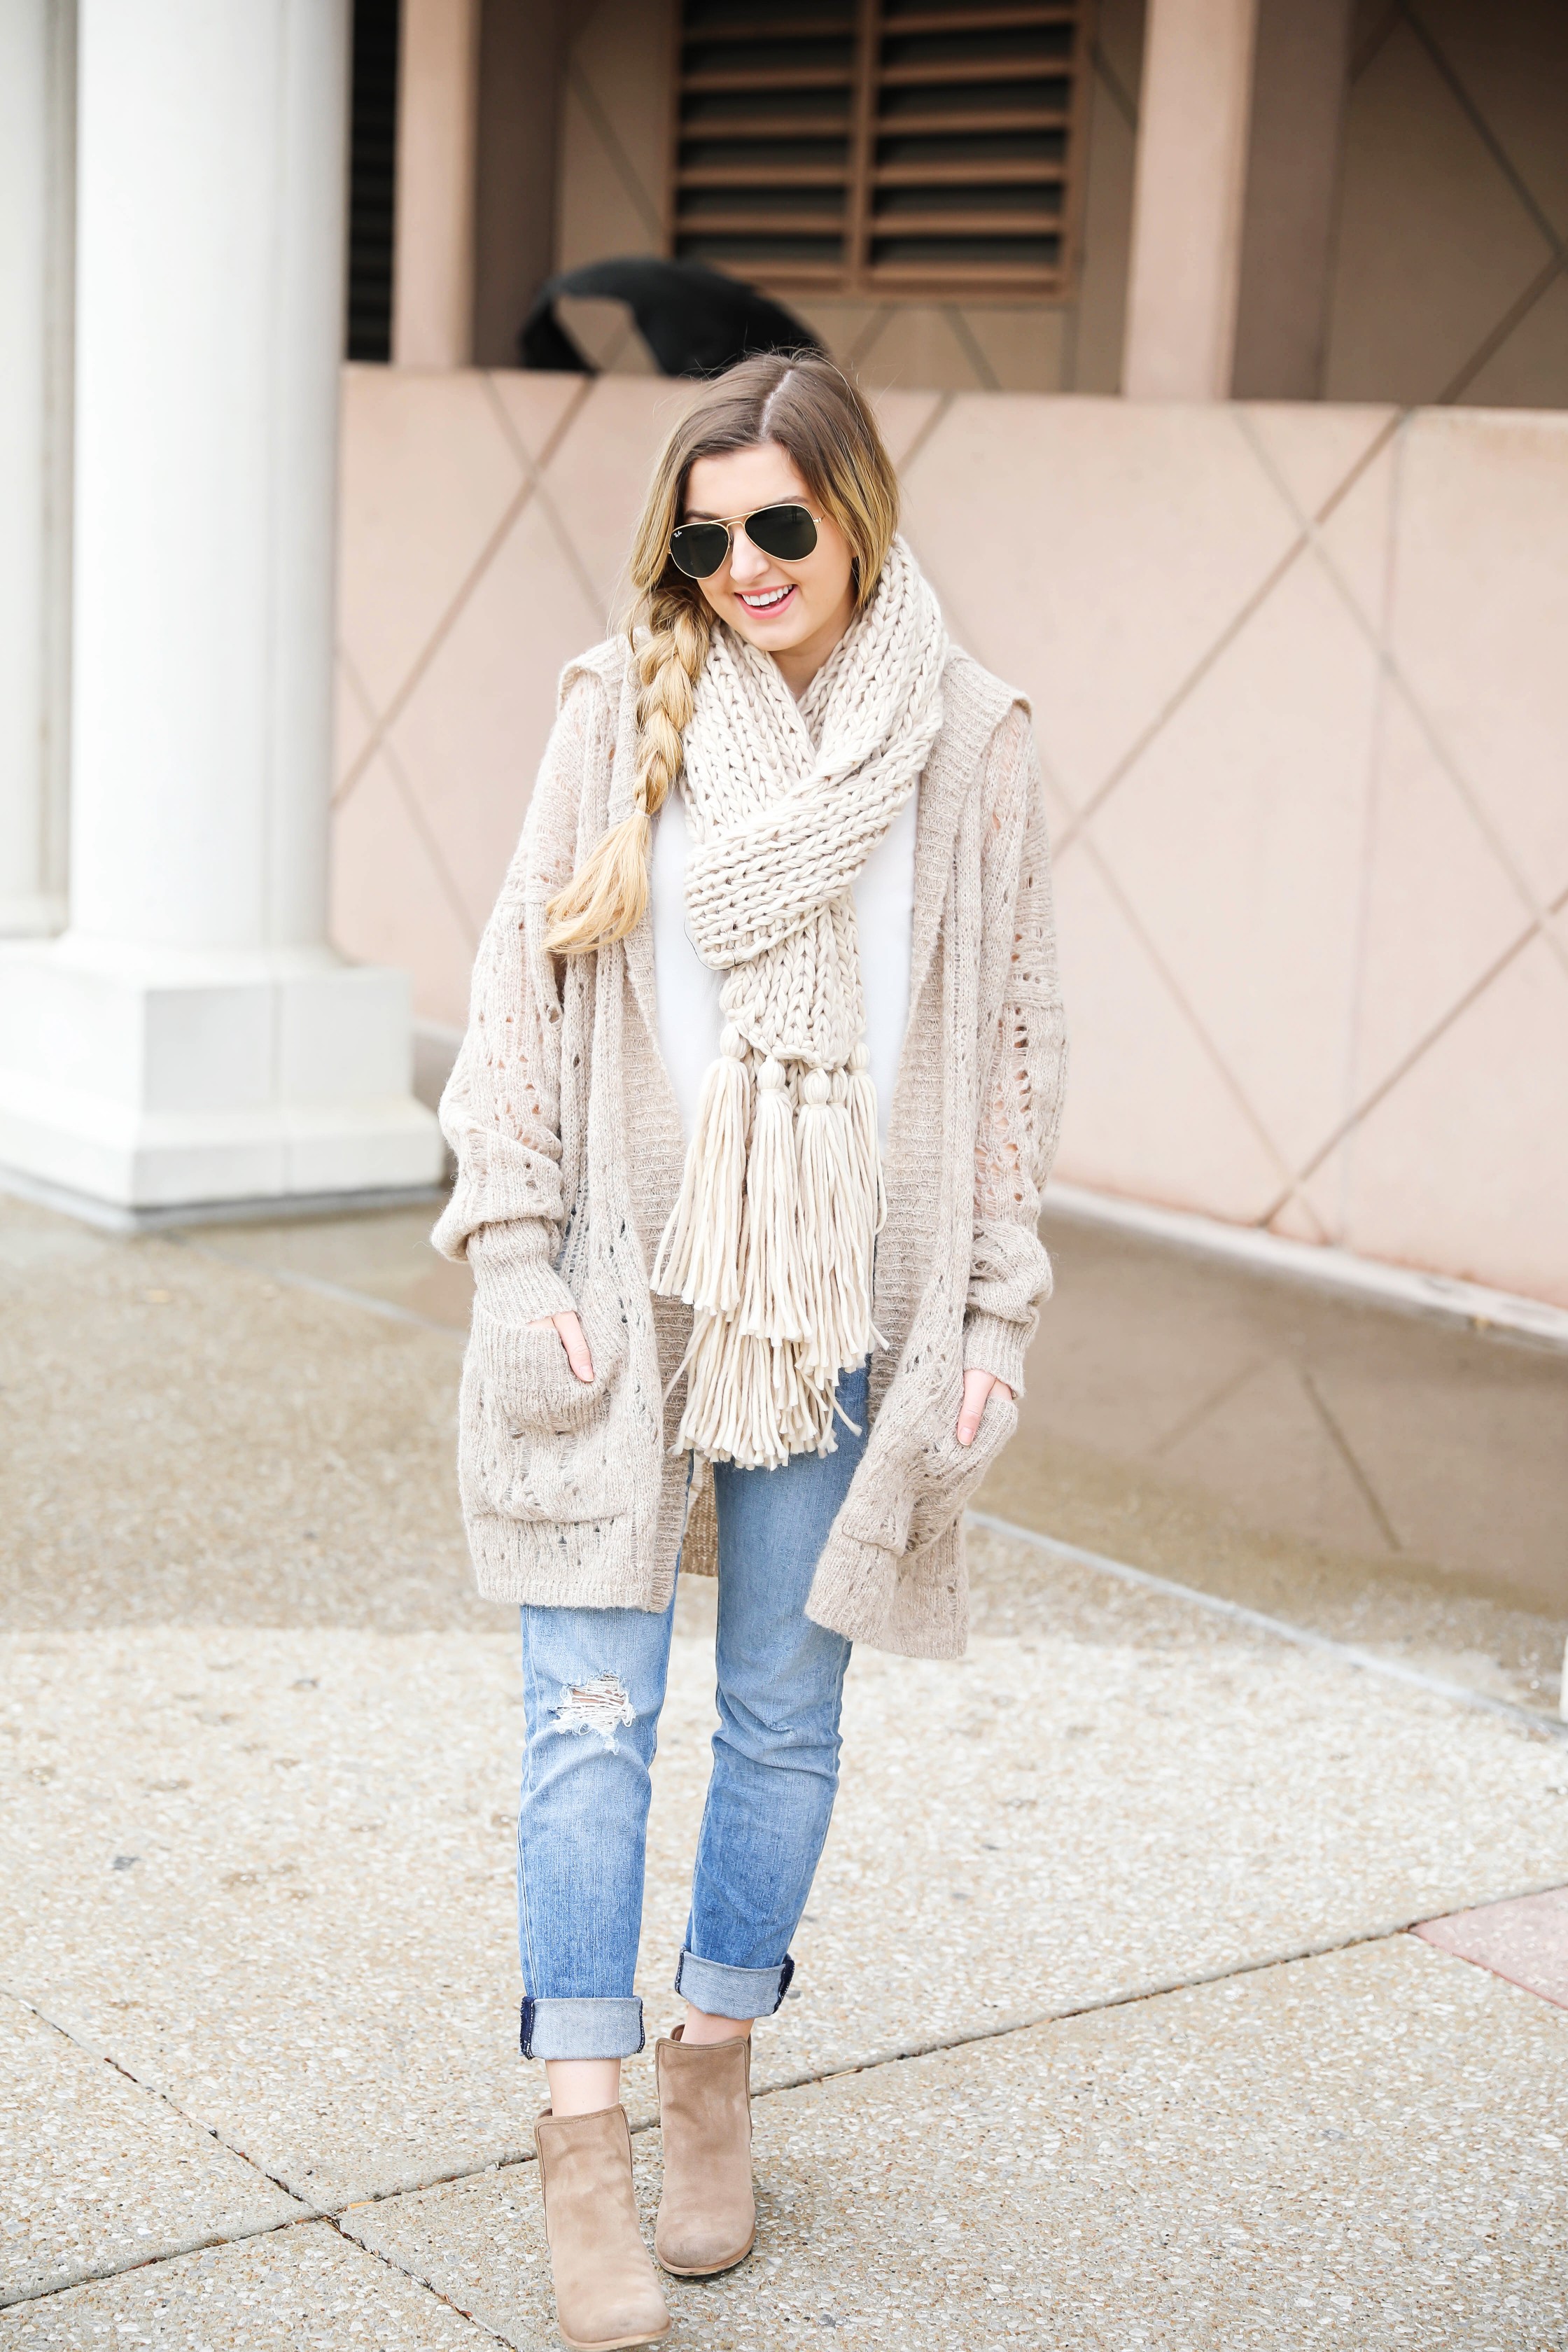 Hooded Free People cardigan! I love this knit cardigan paired with this cozy knit scarf! fit I paired this outfit with my mom jeans to finish the look! Details on fashion blog daily dose of charm by lauren lindmark